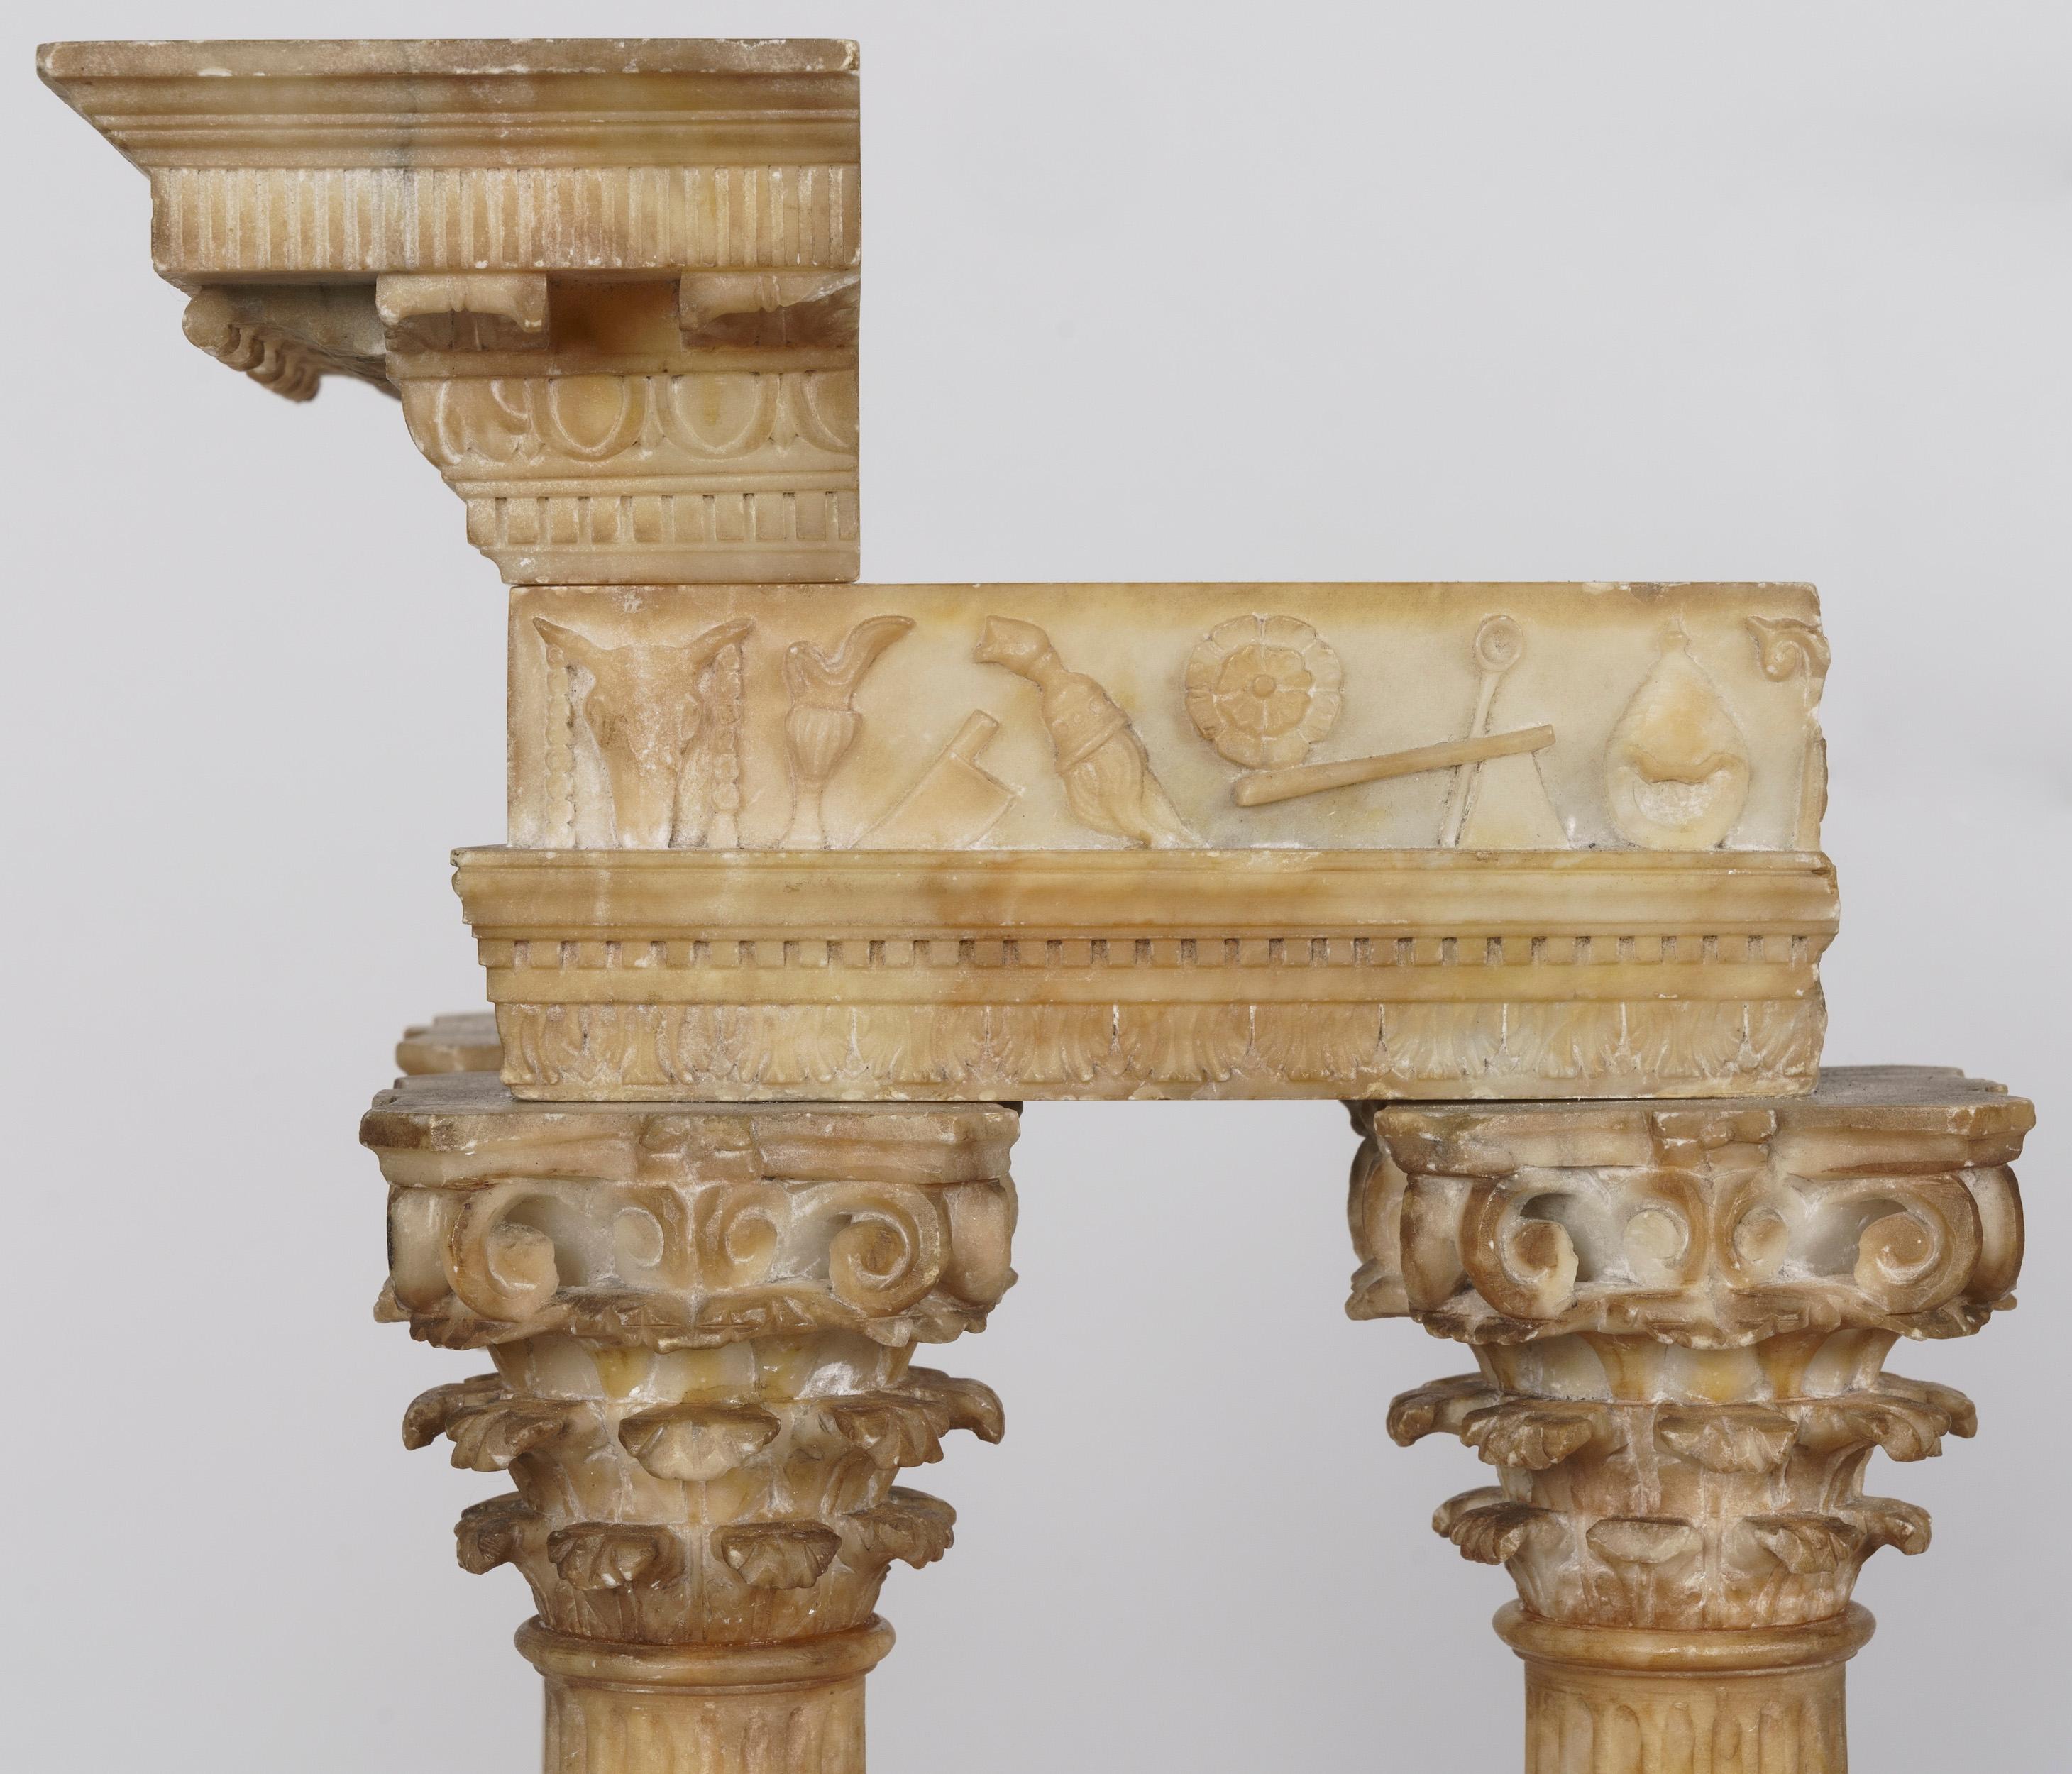 An Impressive Pair of 'Grand Tour' Models Of the Temples of Vespasian and Castor & Pollux 

Carved from alabaster and supported on grey marble bases, the models representing the ruins of the two temples located in the Roman Forum, their Corinthian